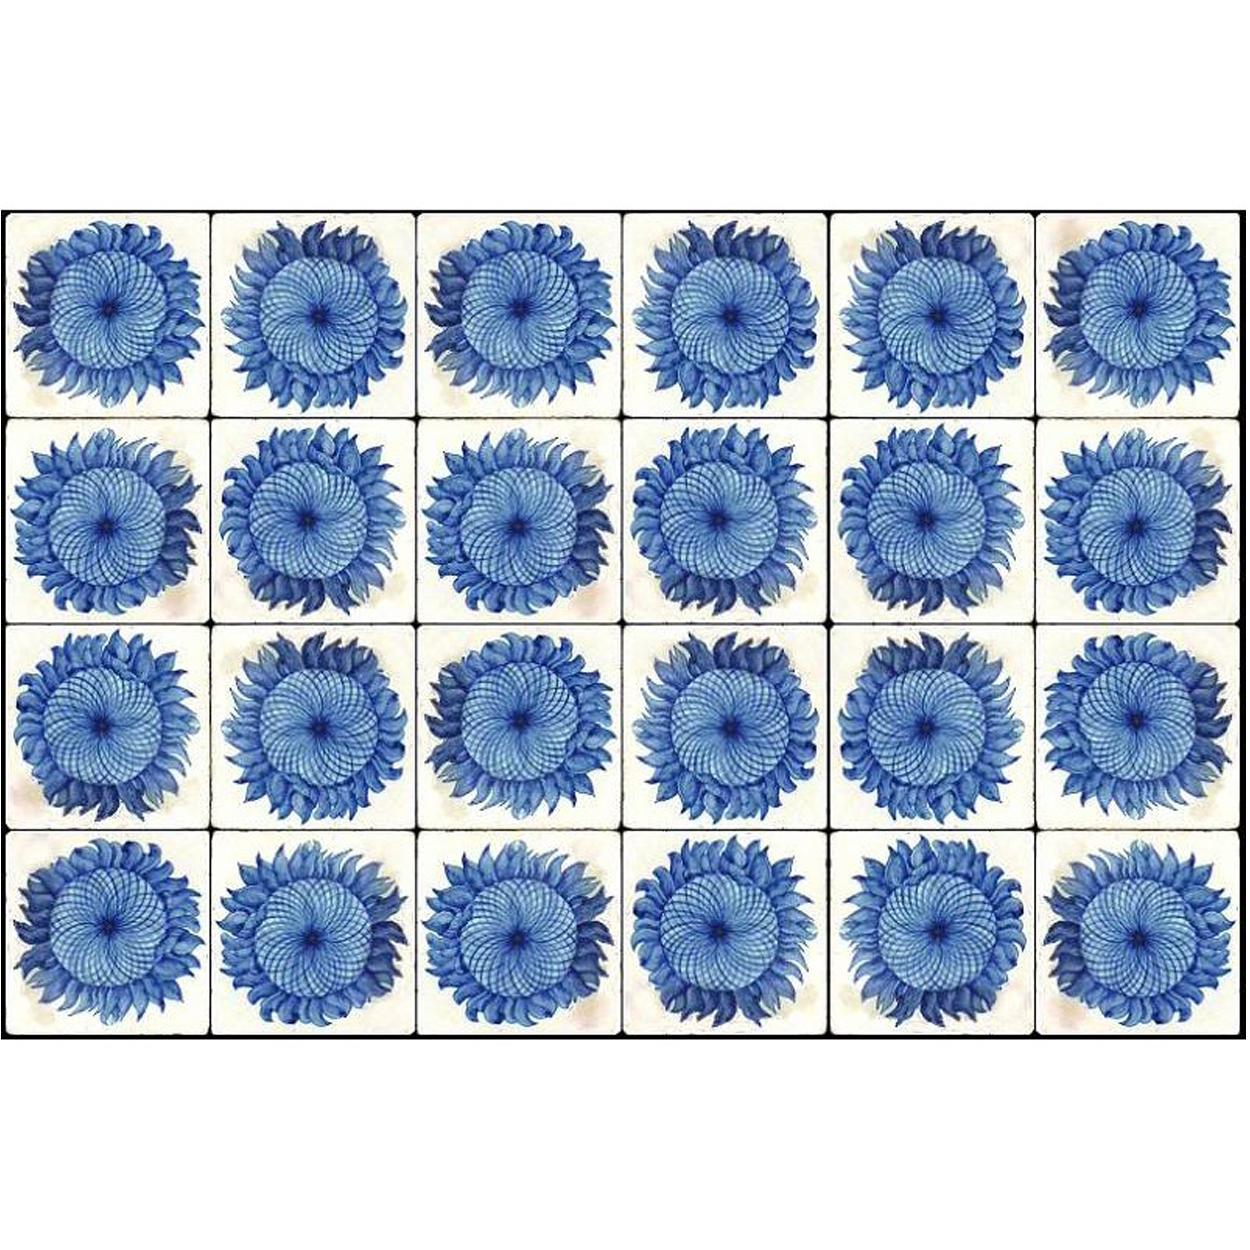 1 of the 24 blue and white sunflower tiles. The floral tiles are handmade and hand painted in Europe, Italy.
These tiles are particularly beautiful, the biscuit is handmade and the Majolica is done by hand immersion. The result is splendid.

The